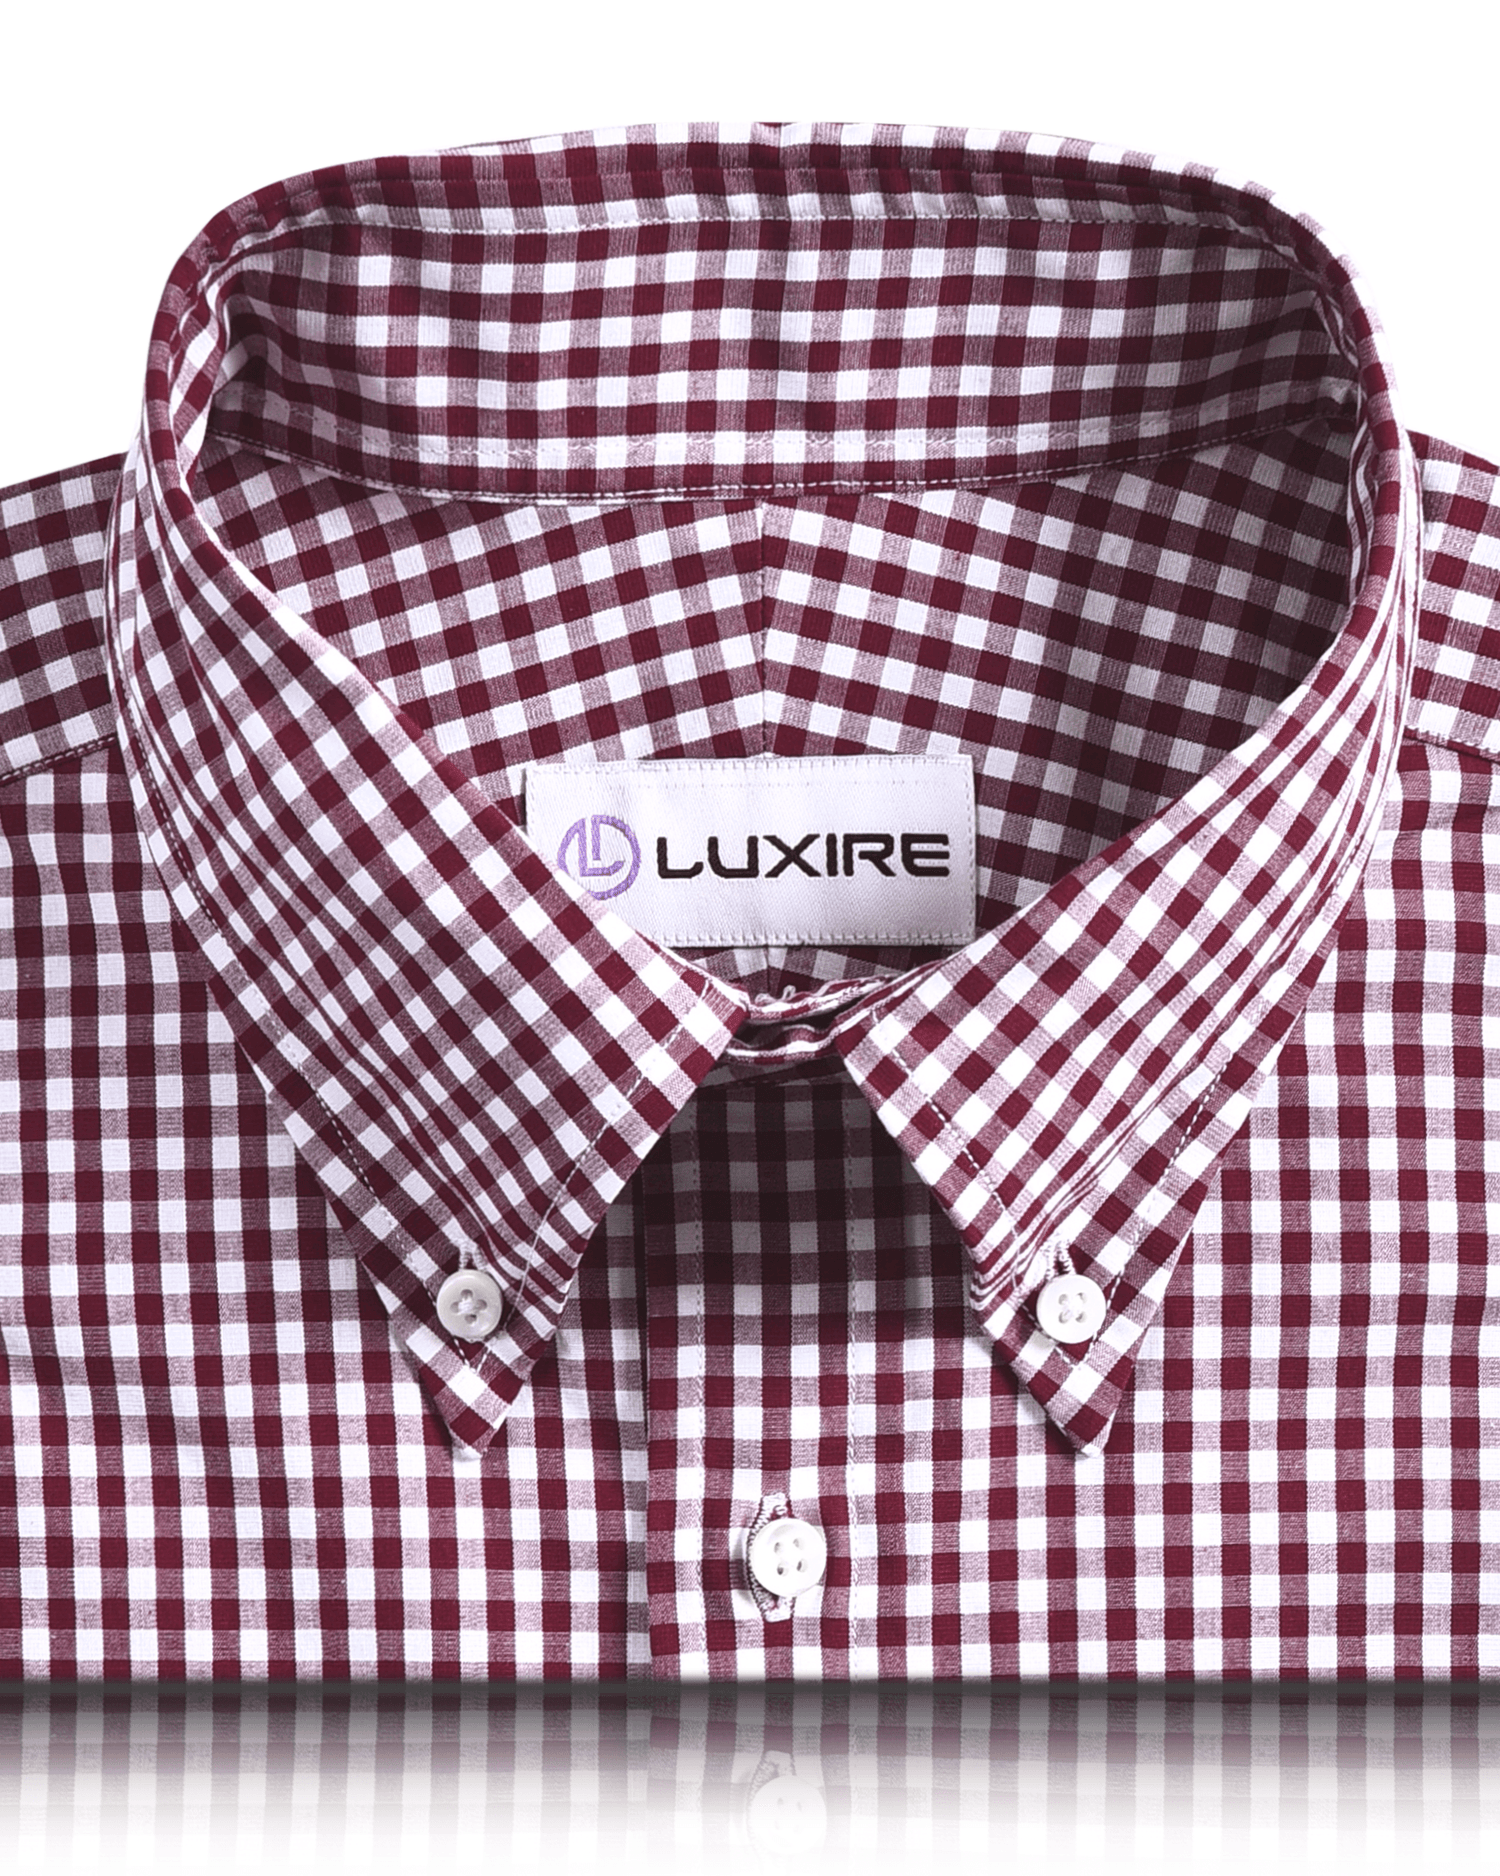 Front close view of custom check shirts for men by Luxire deep red gingham